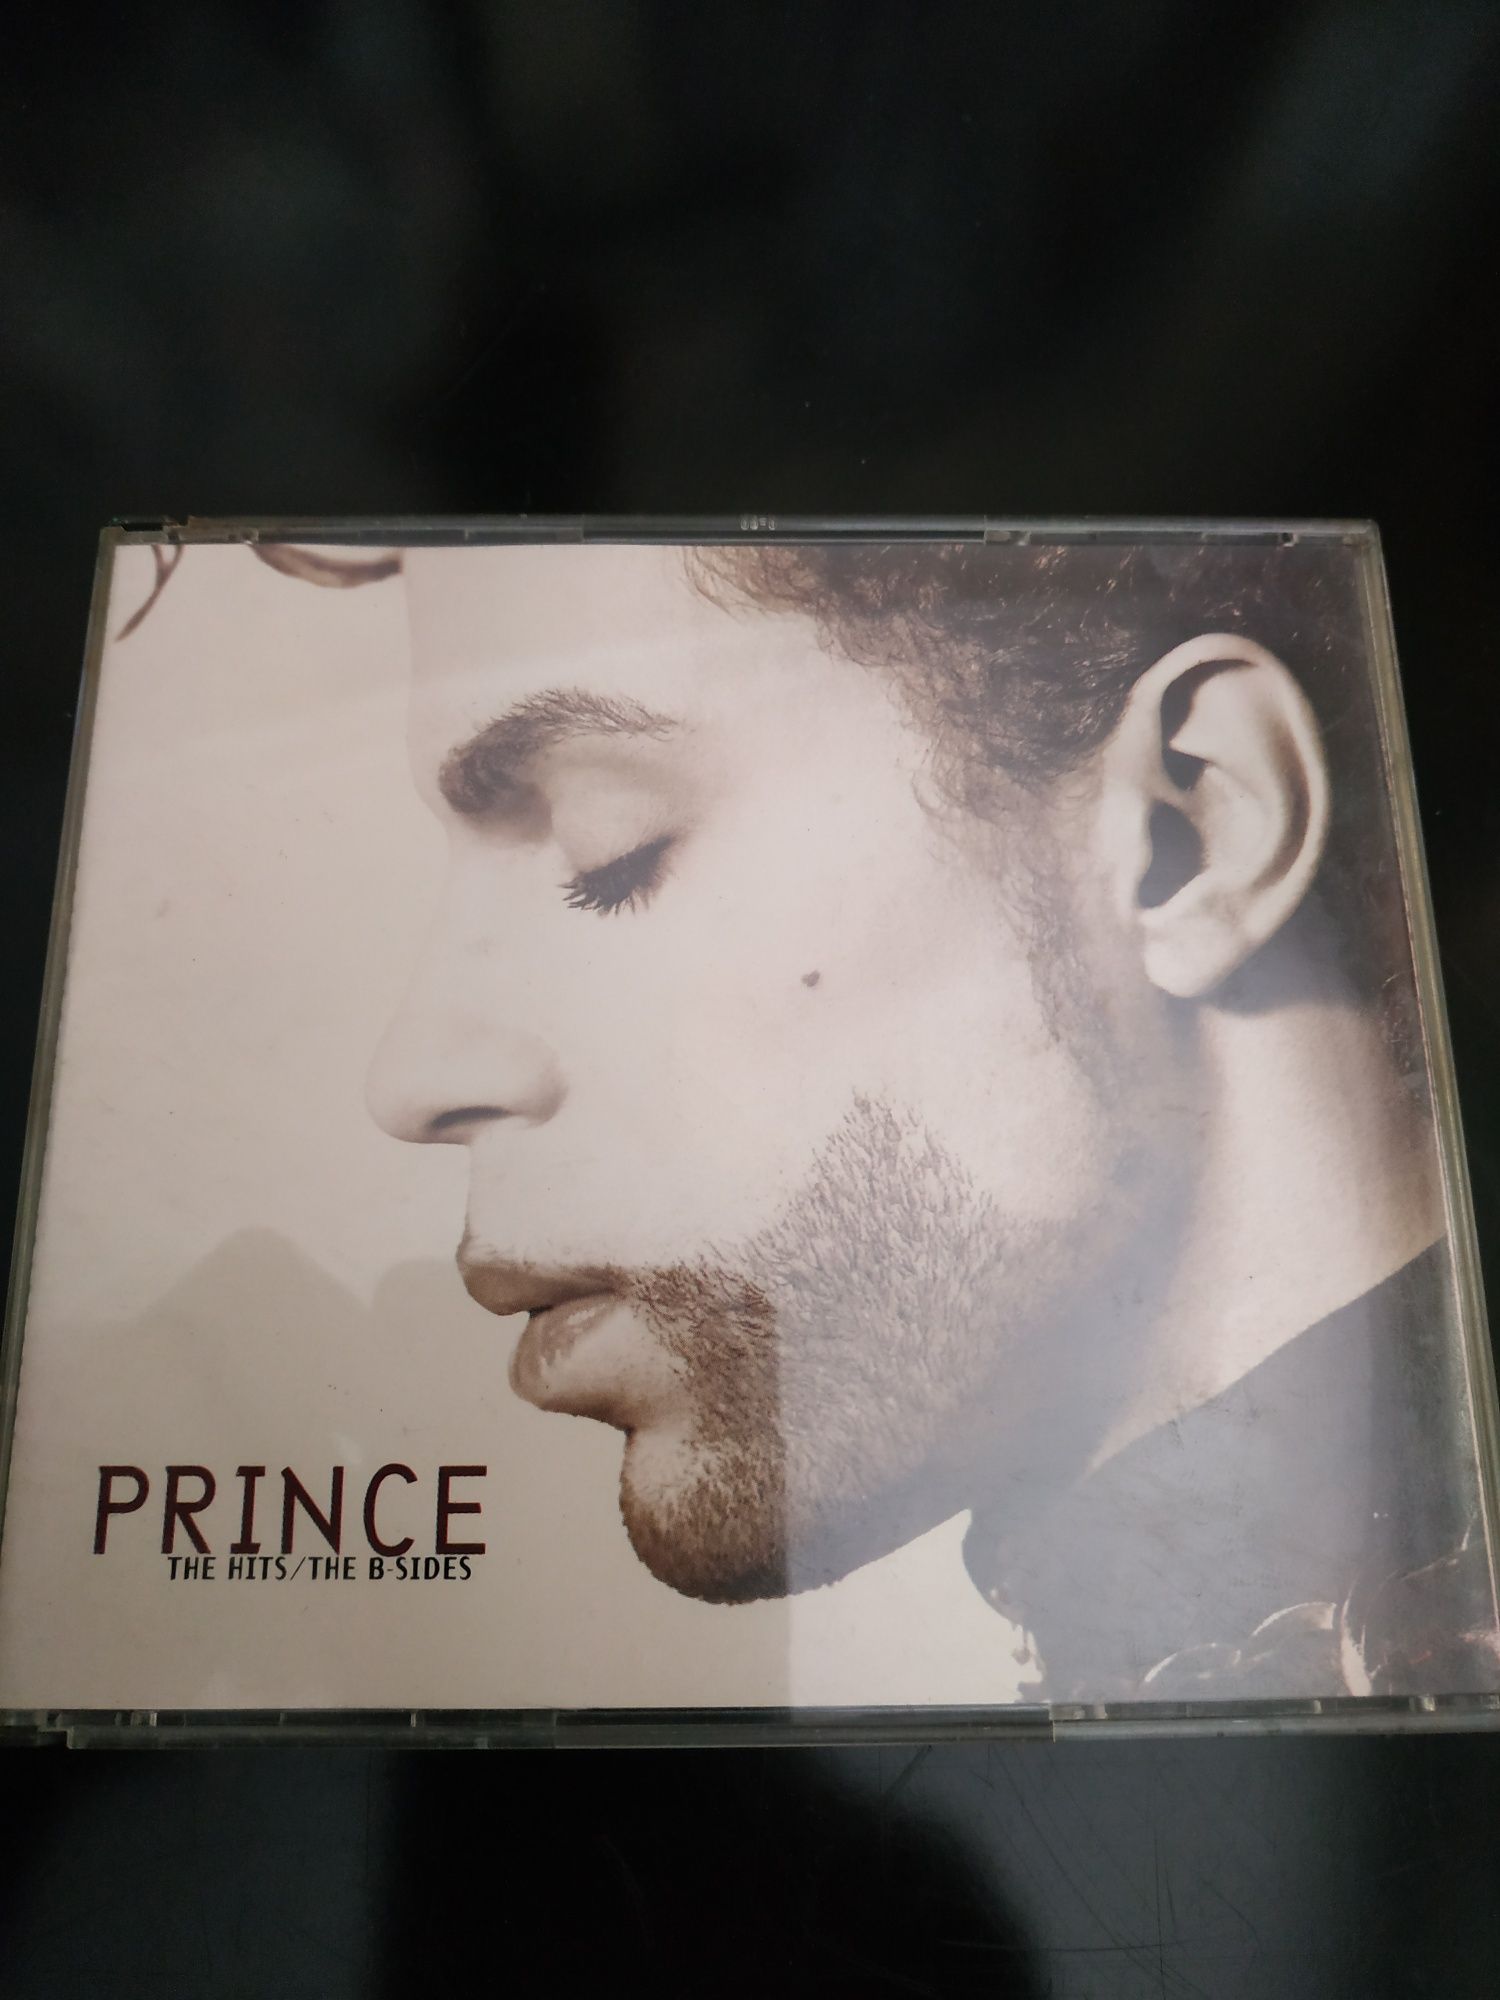 Prince-the hits & b-sides 3 cds